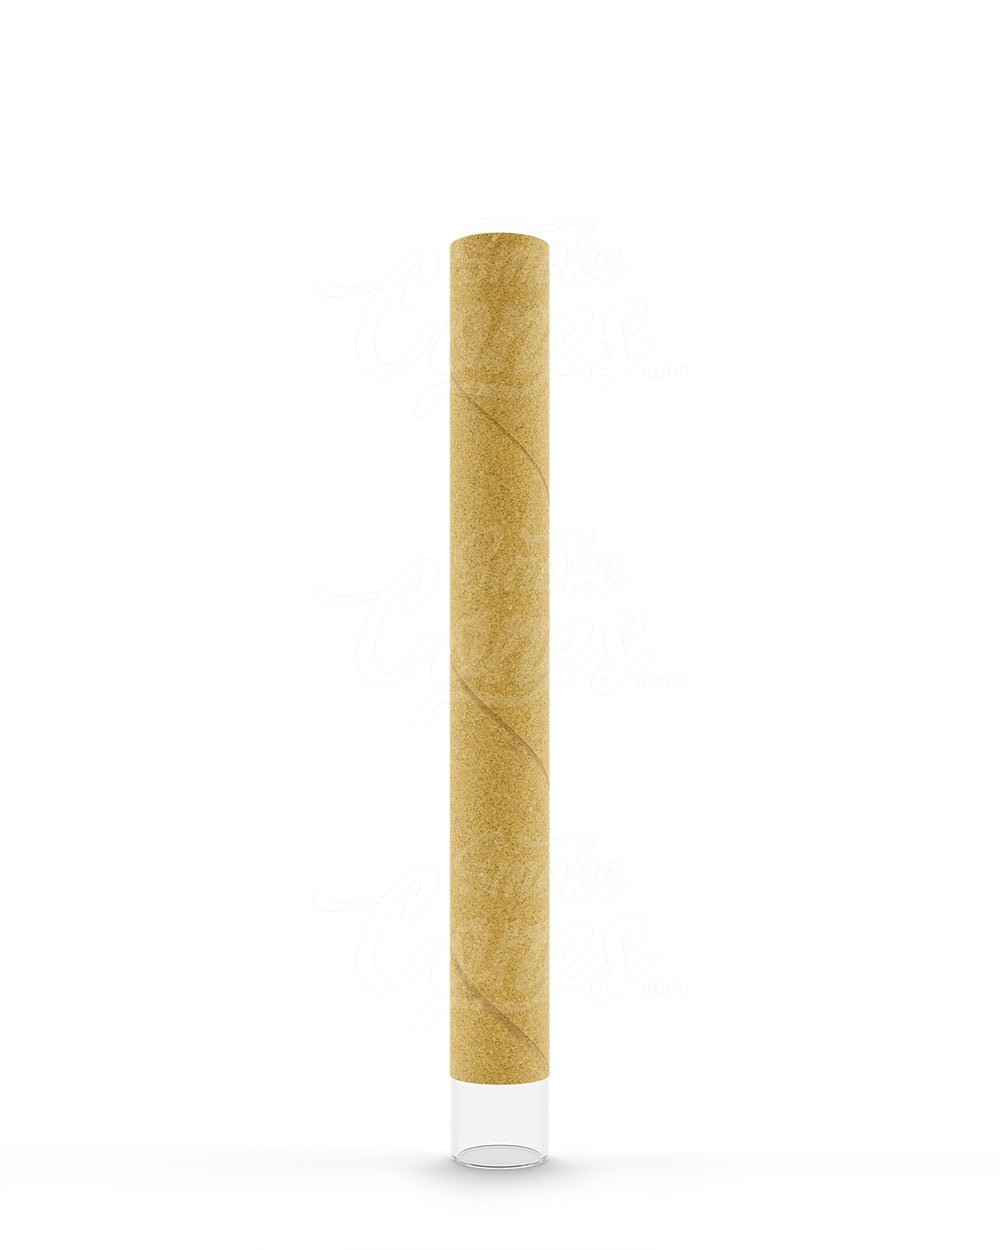 Crop Kingz 109mm King Size Glass Tipped Pre-Rolled Organic Hemp Blunt Cones 110/Box - 1